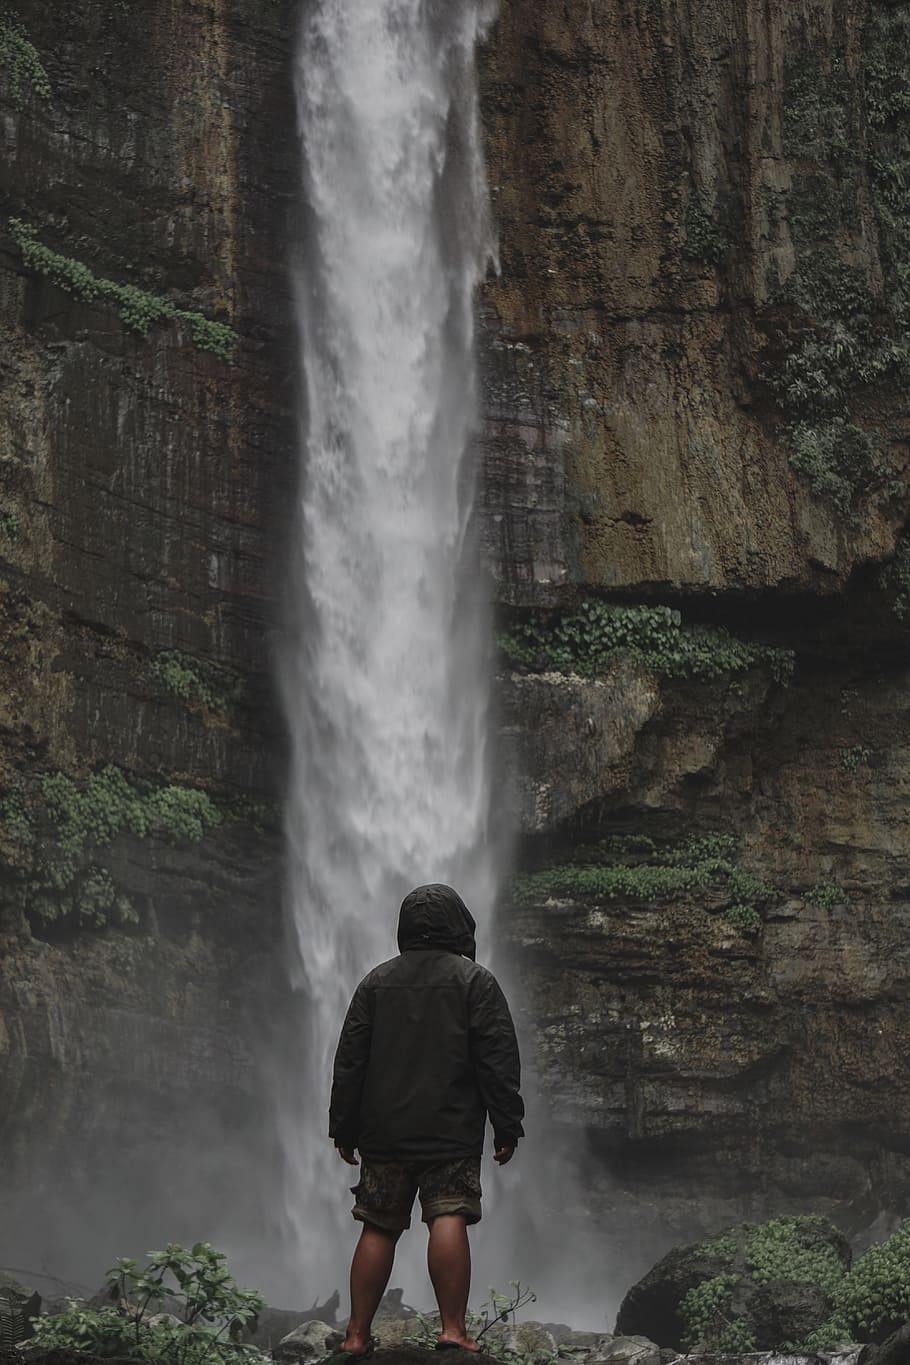 indonesian, waterfall, fog, water, rear view, real people, scenics - nature, long exposure, lifestyles, leisure activity